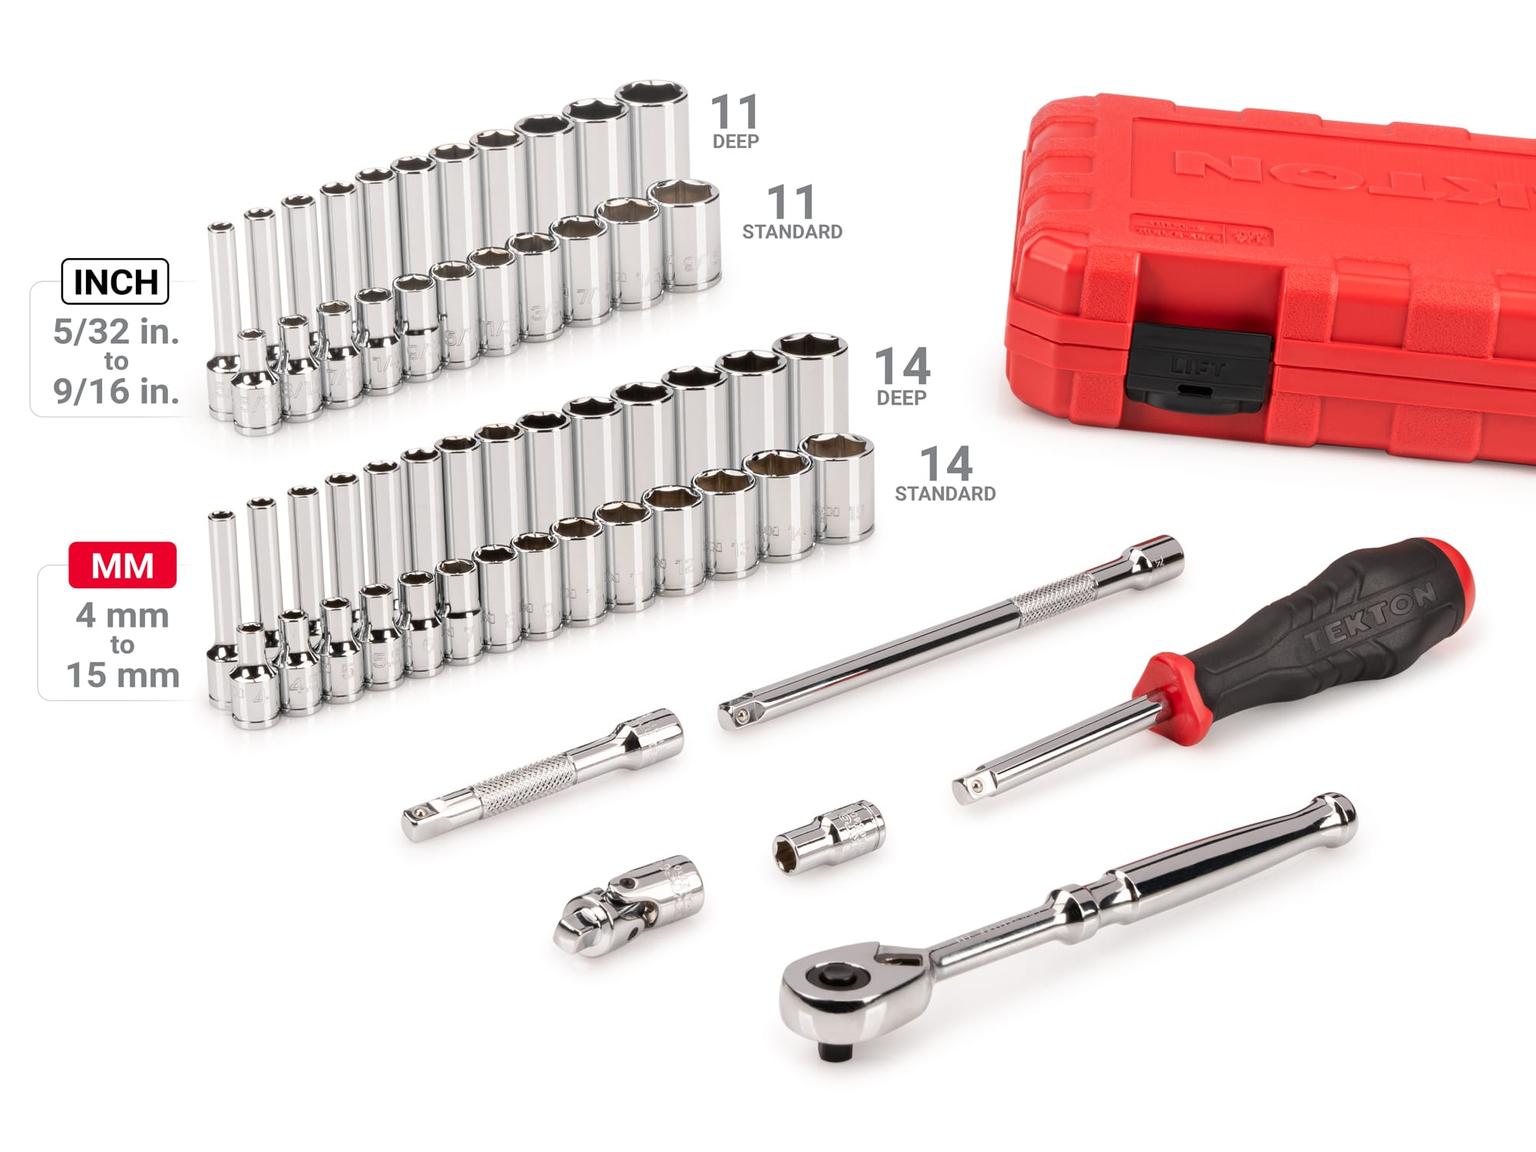 TEKTON SKT05303-D 1/4 Inch Drive 6-Point Socket and Ratchet Set, 56-Piece (5/32 - 9/16 in., 4 - 15 mm)